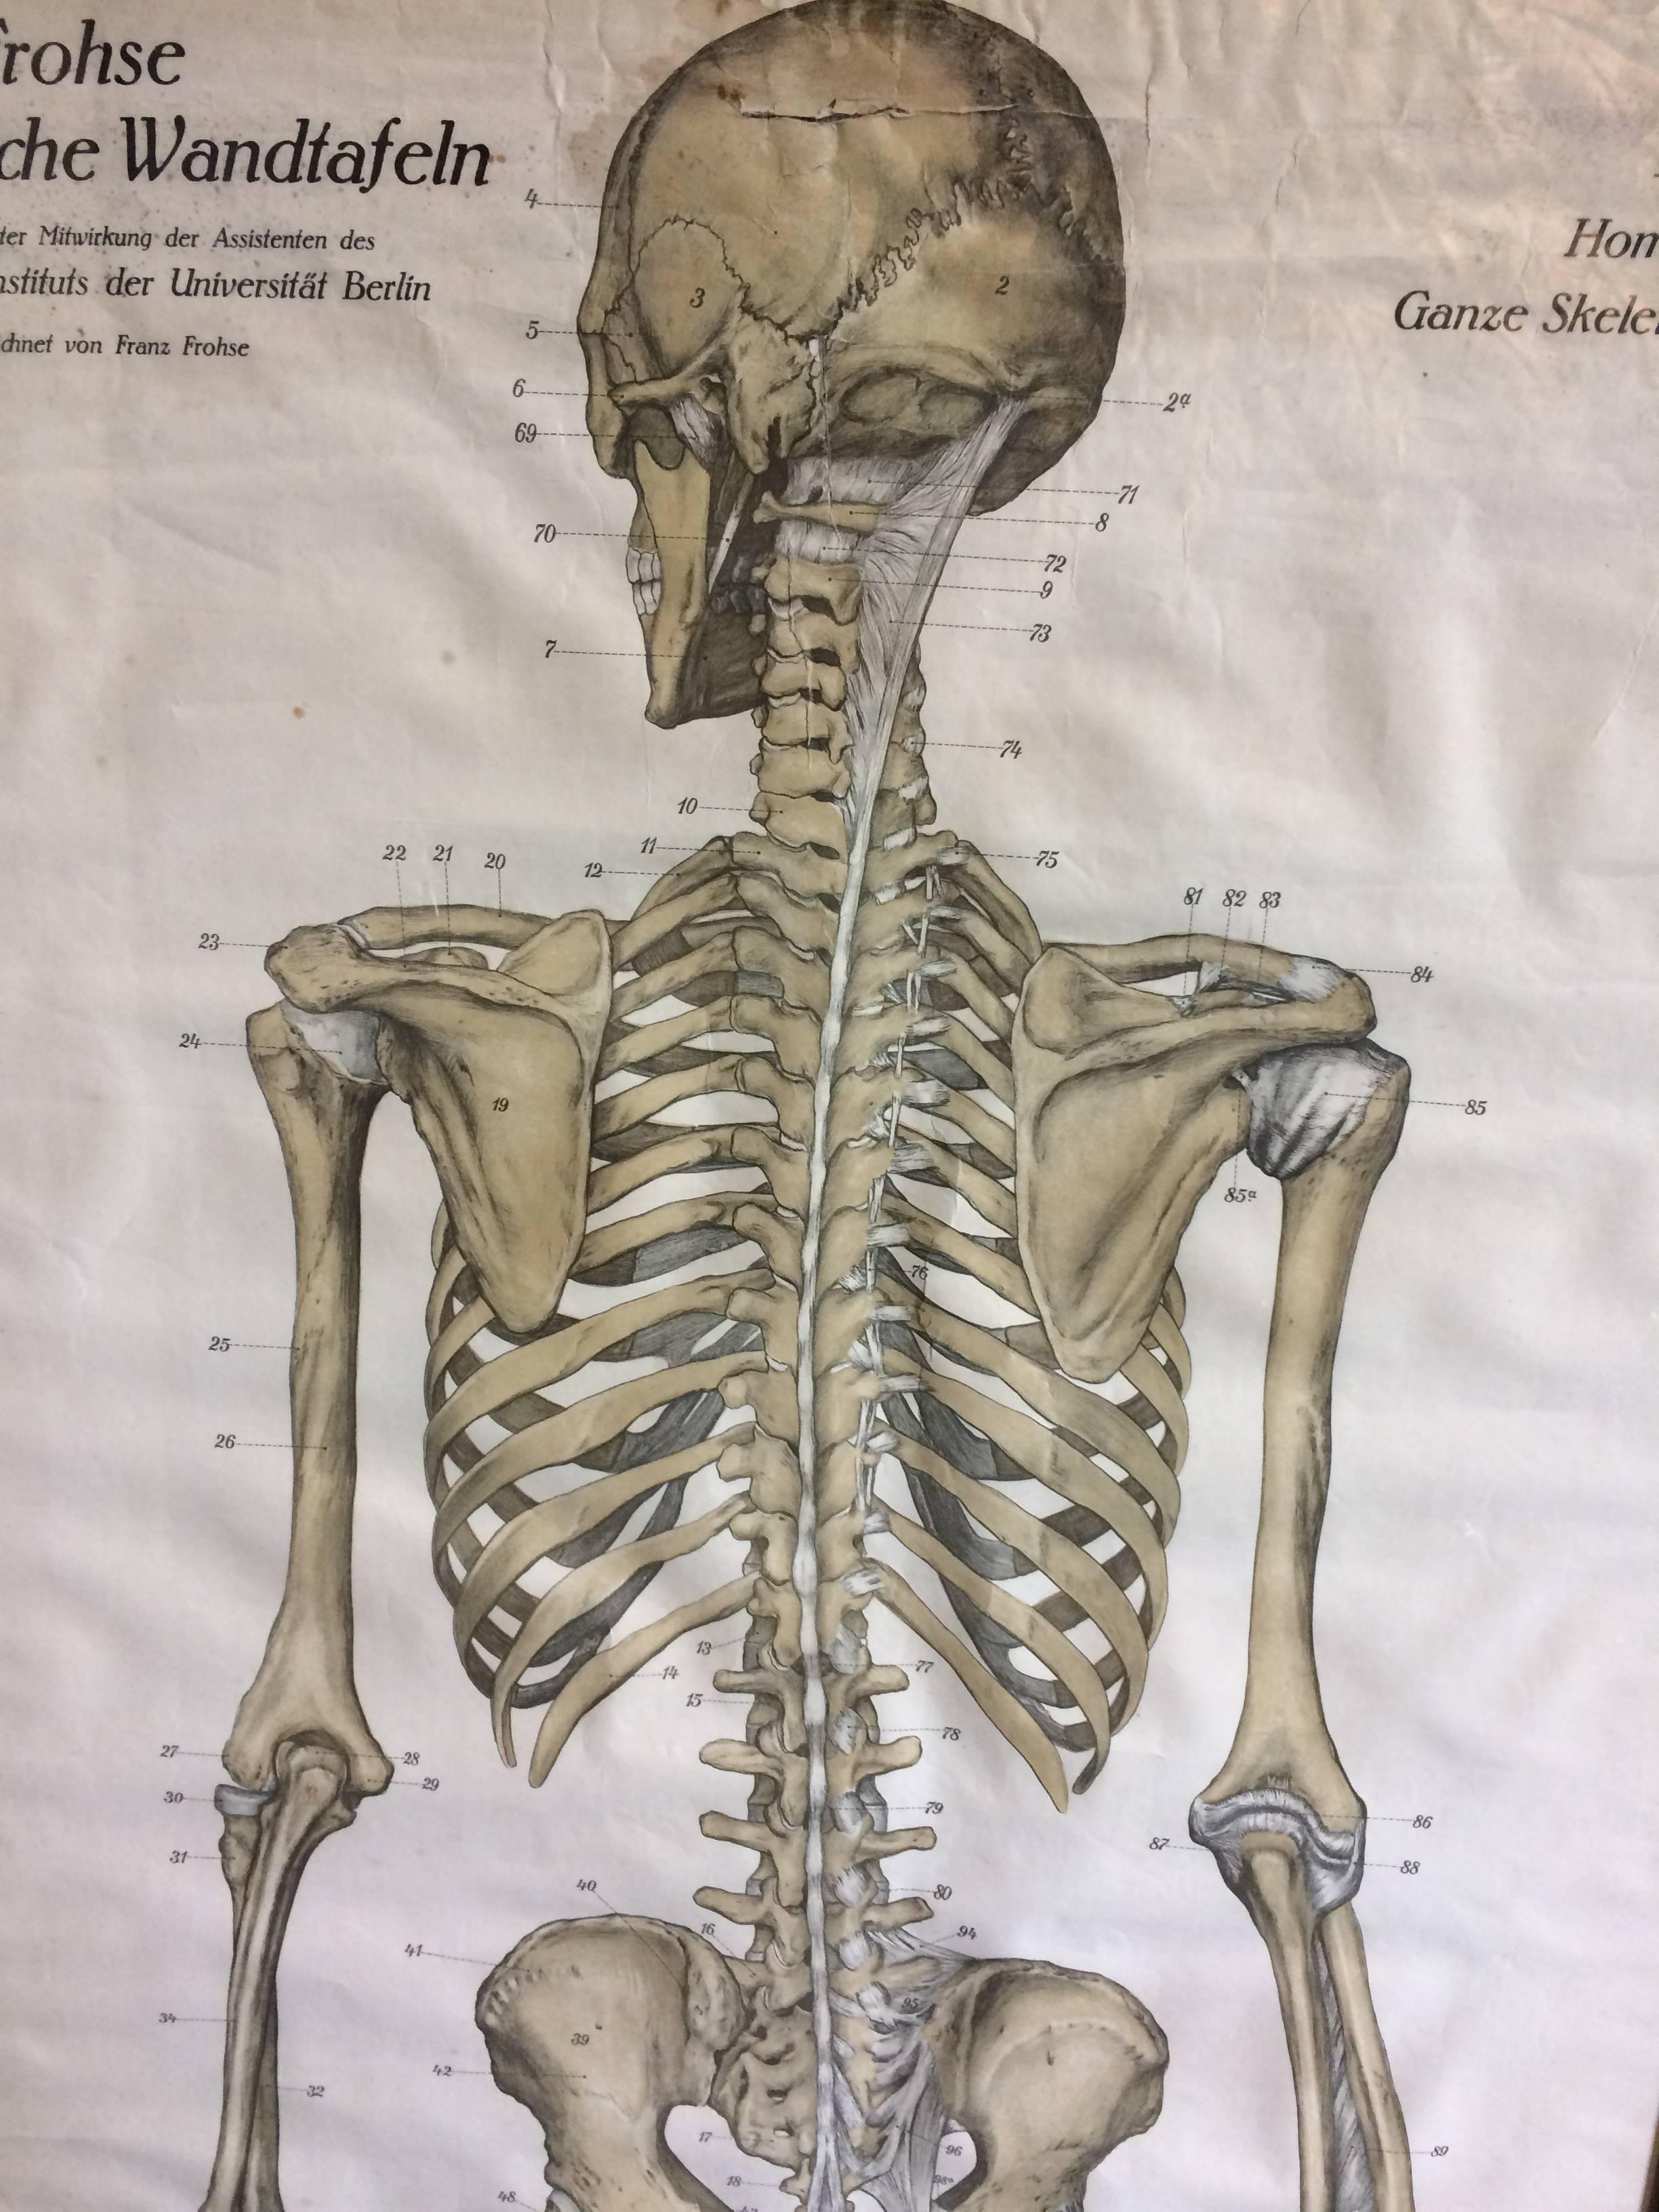 This is very rare original German chart.
 Drawn by Franz Frohse
custom-made frame and glazed.
In the 1910s Franz Frohse (University of Berlin) created a series of anatomical wall charts which became widely used internationally because of their